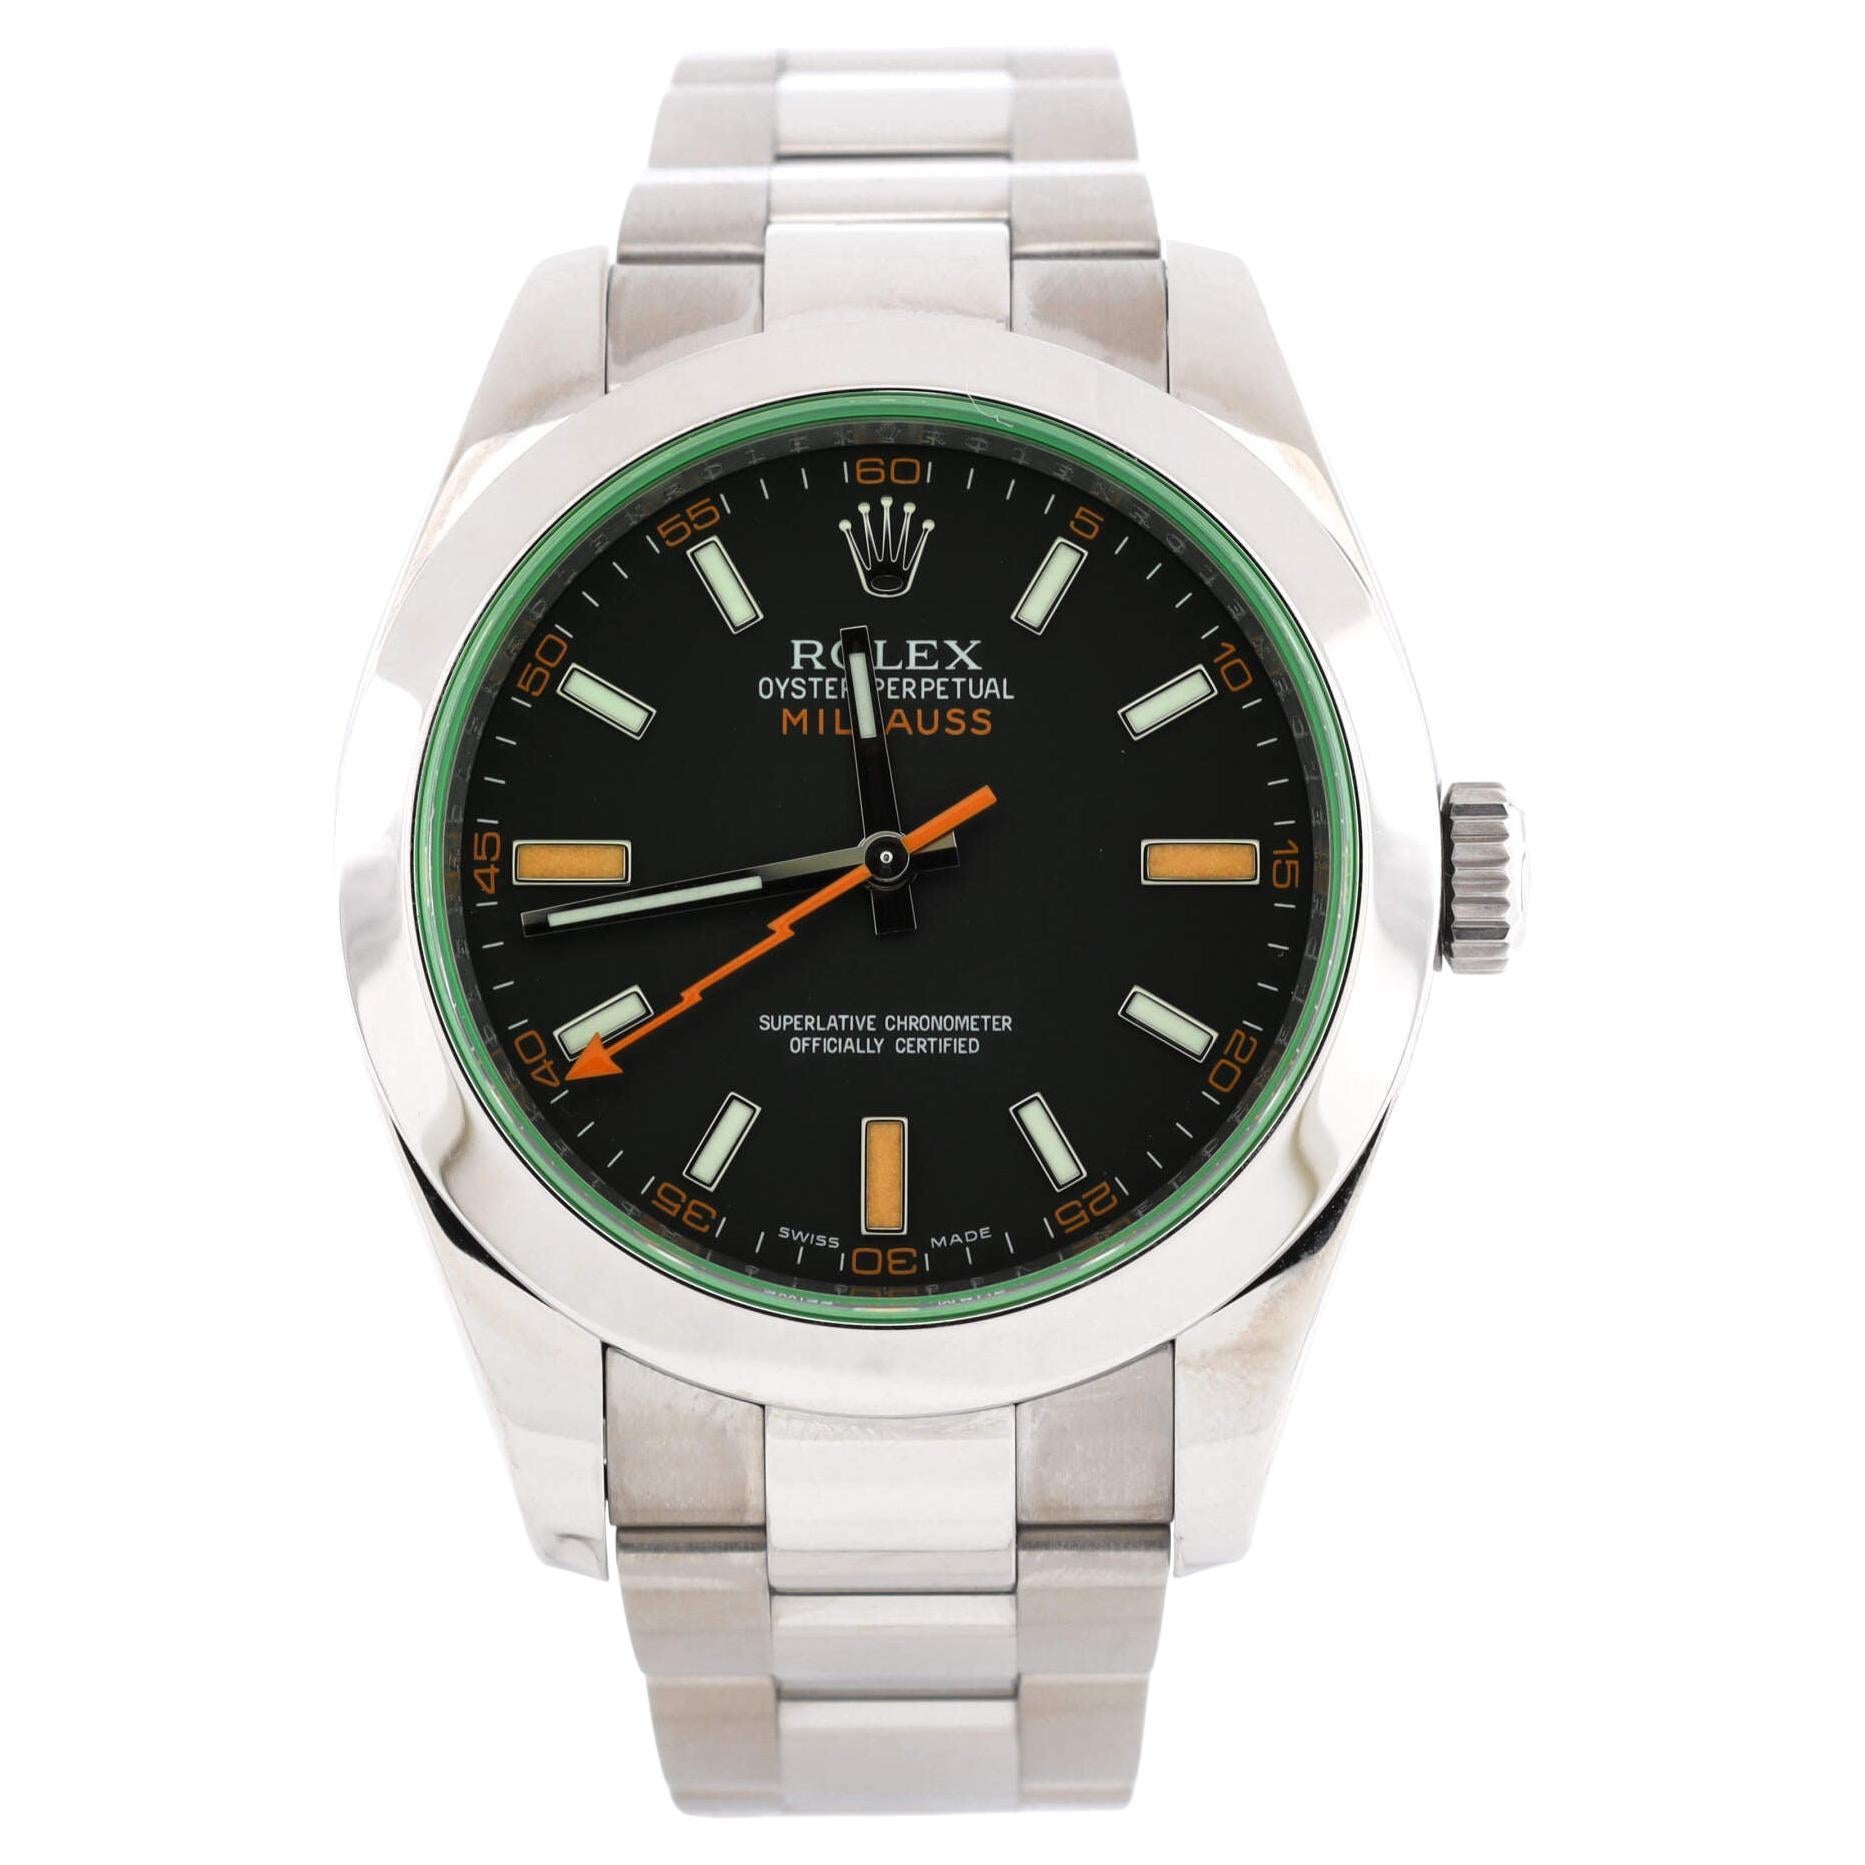 Rolex Oyster Perpetual Milgauss Automatic Watch Stainless Steel